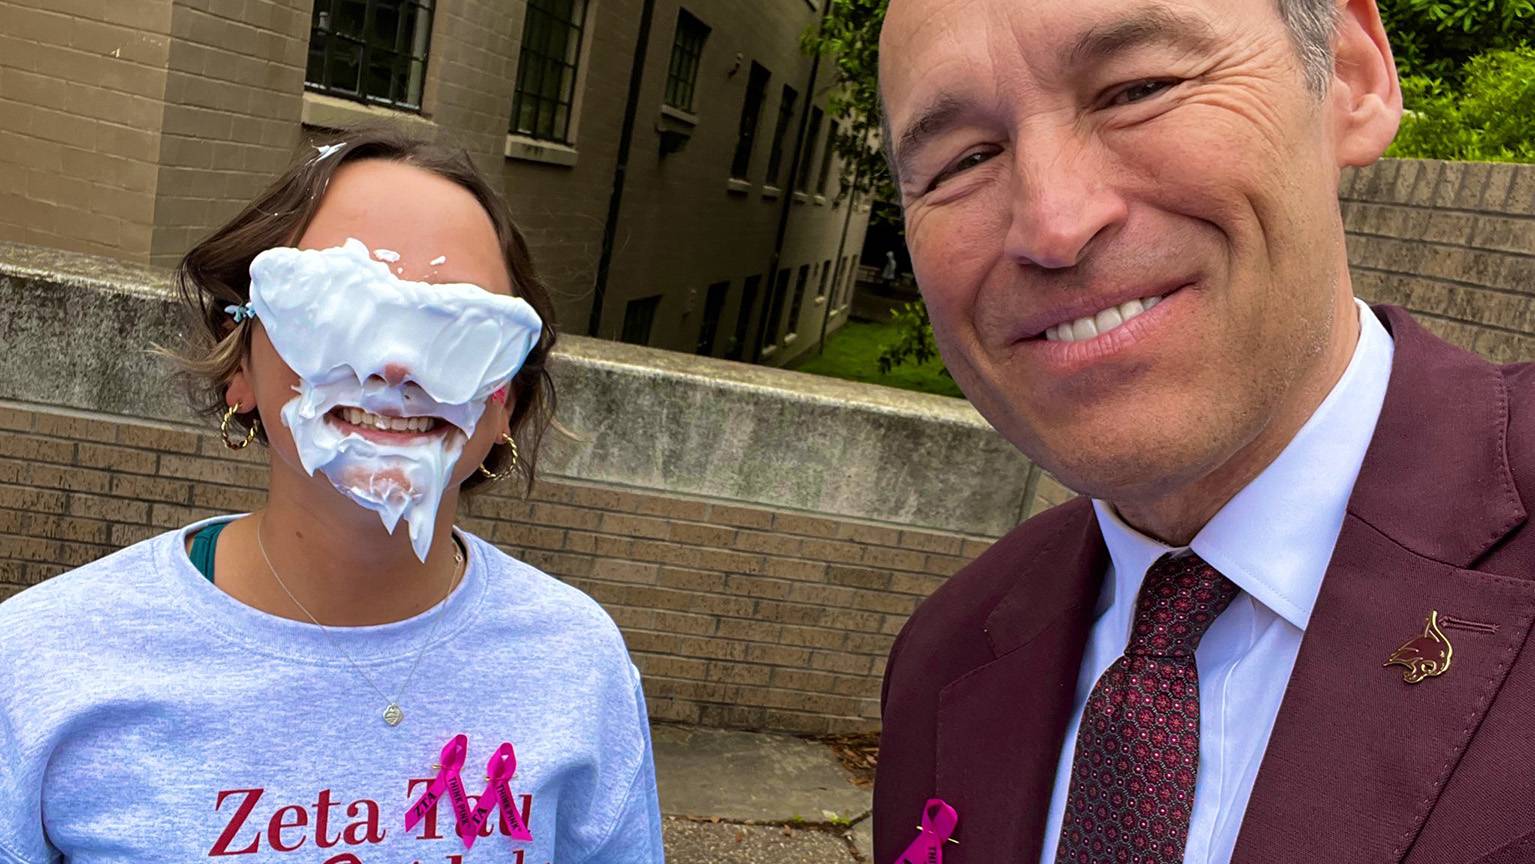 President Damphousse, right, poses for a photo with a student with pie covering her face.